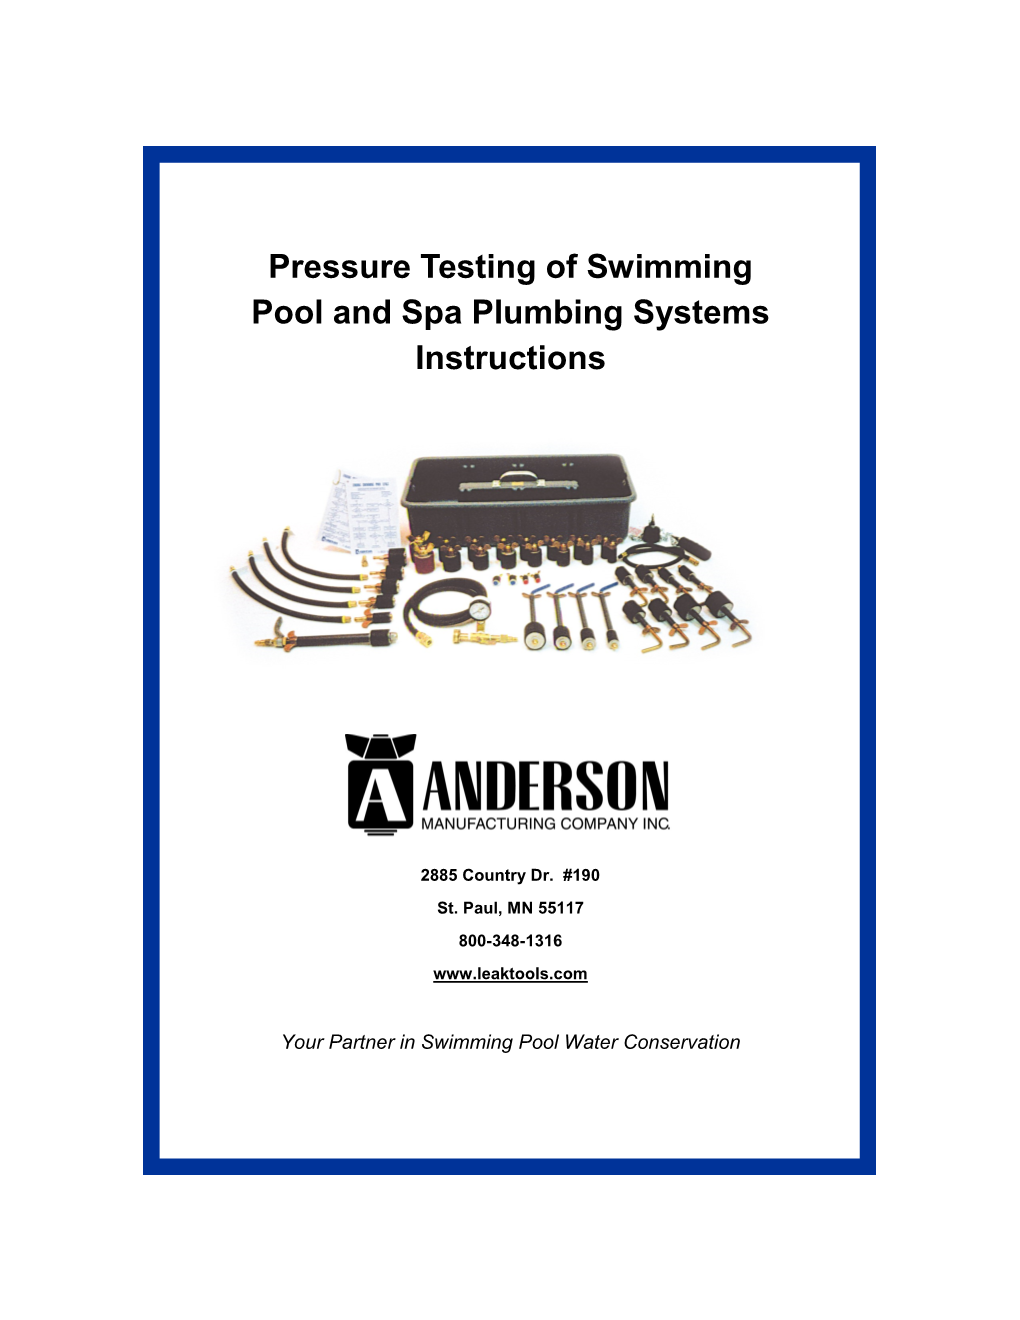 Pressure Testing of Swimming Pool and Spa Plumbing Systems Instructions